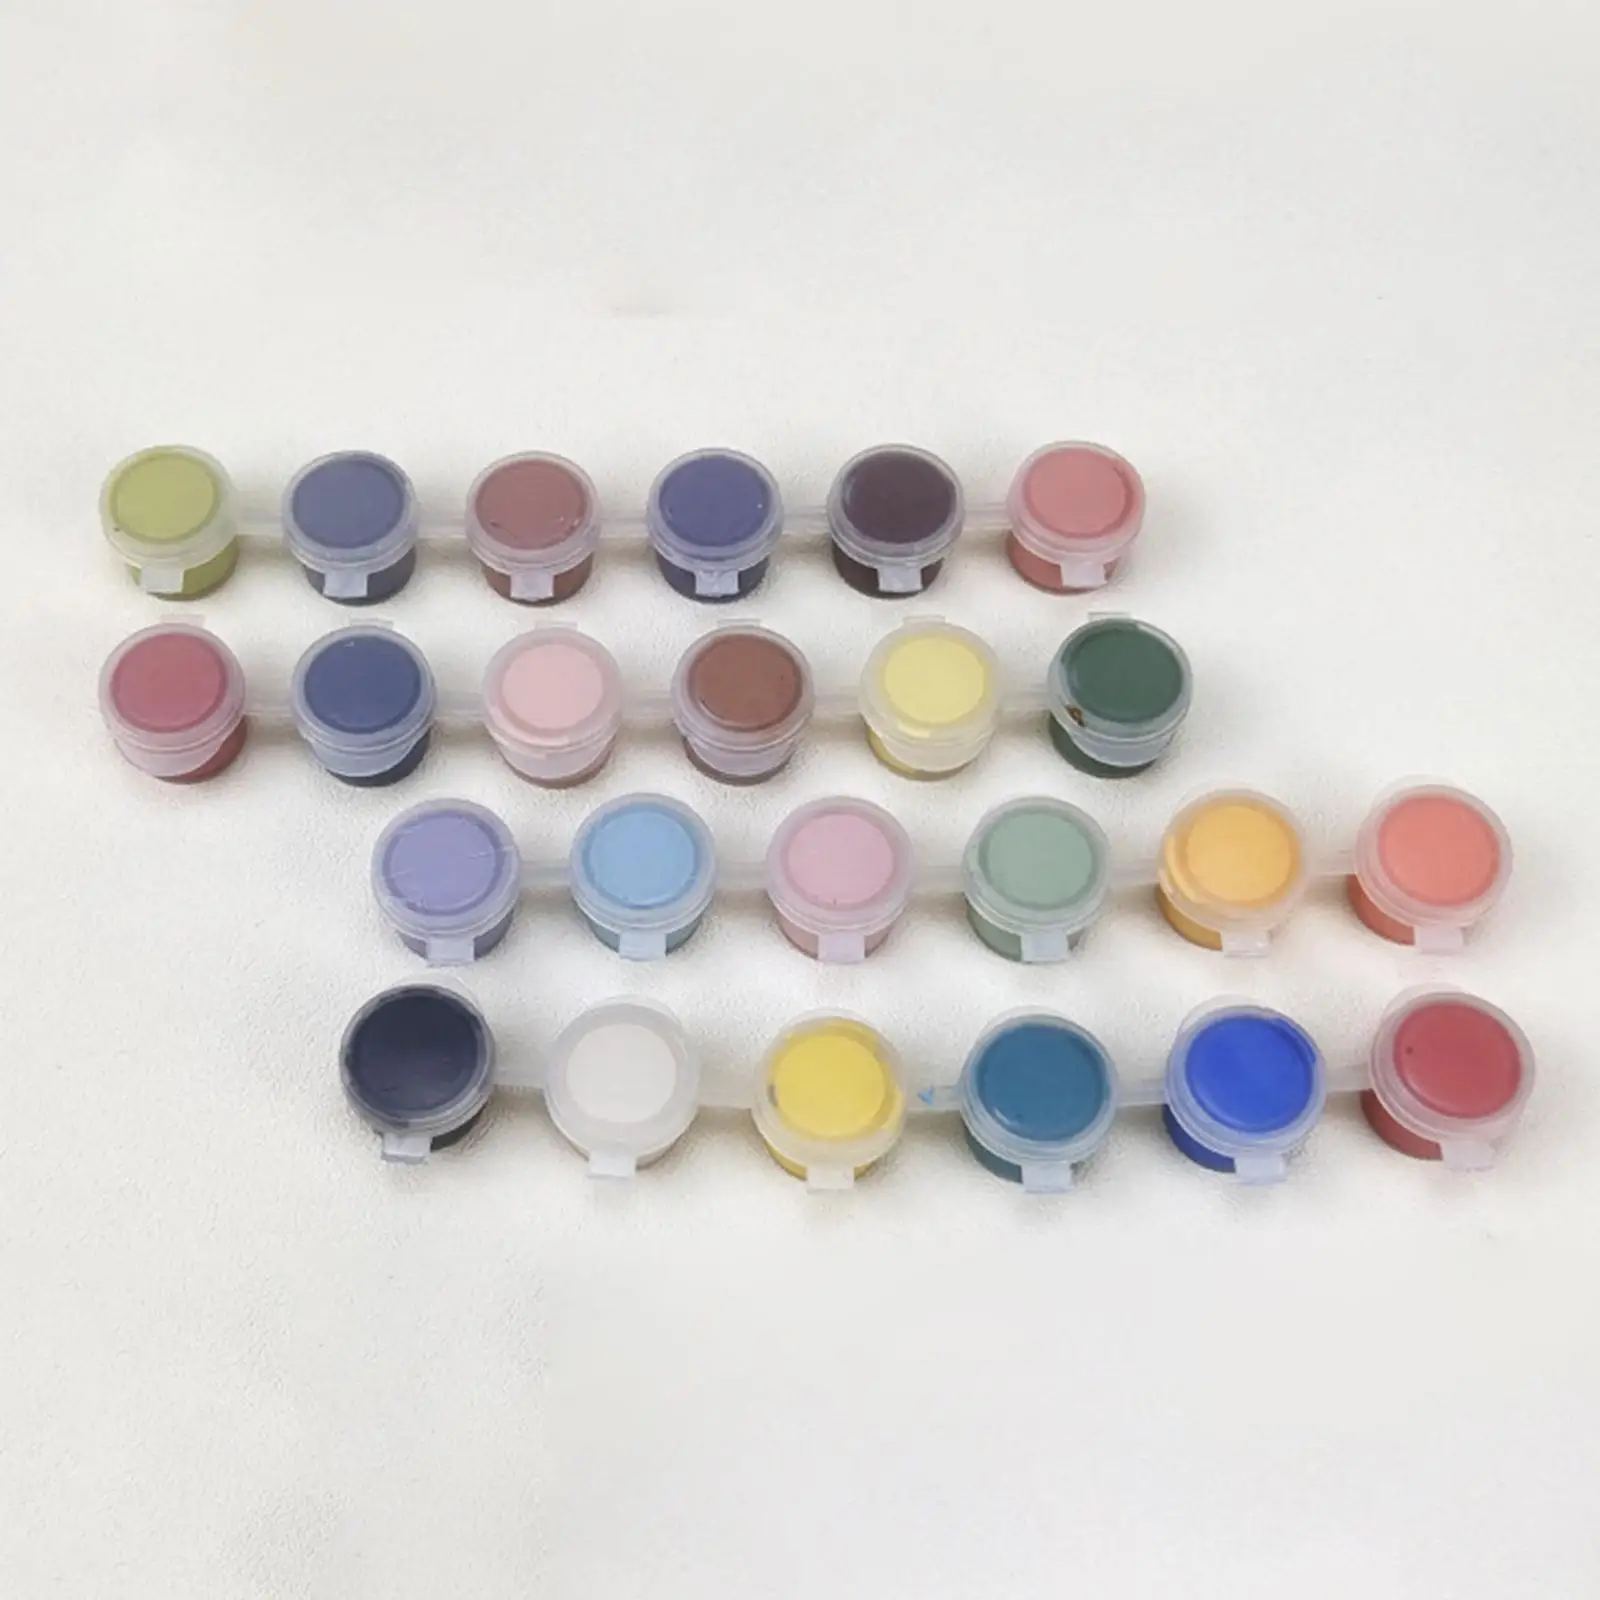 24x Ceramic Pigments 24 Colors Painted Concentrated Painting Pigments Underglaze Color Pigment for artists Adults Beginners